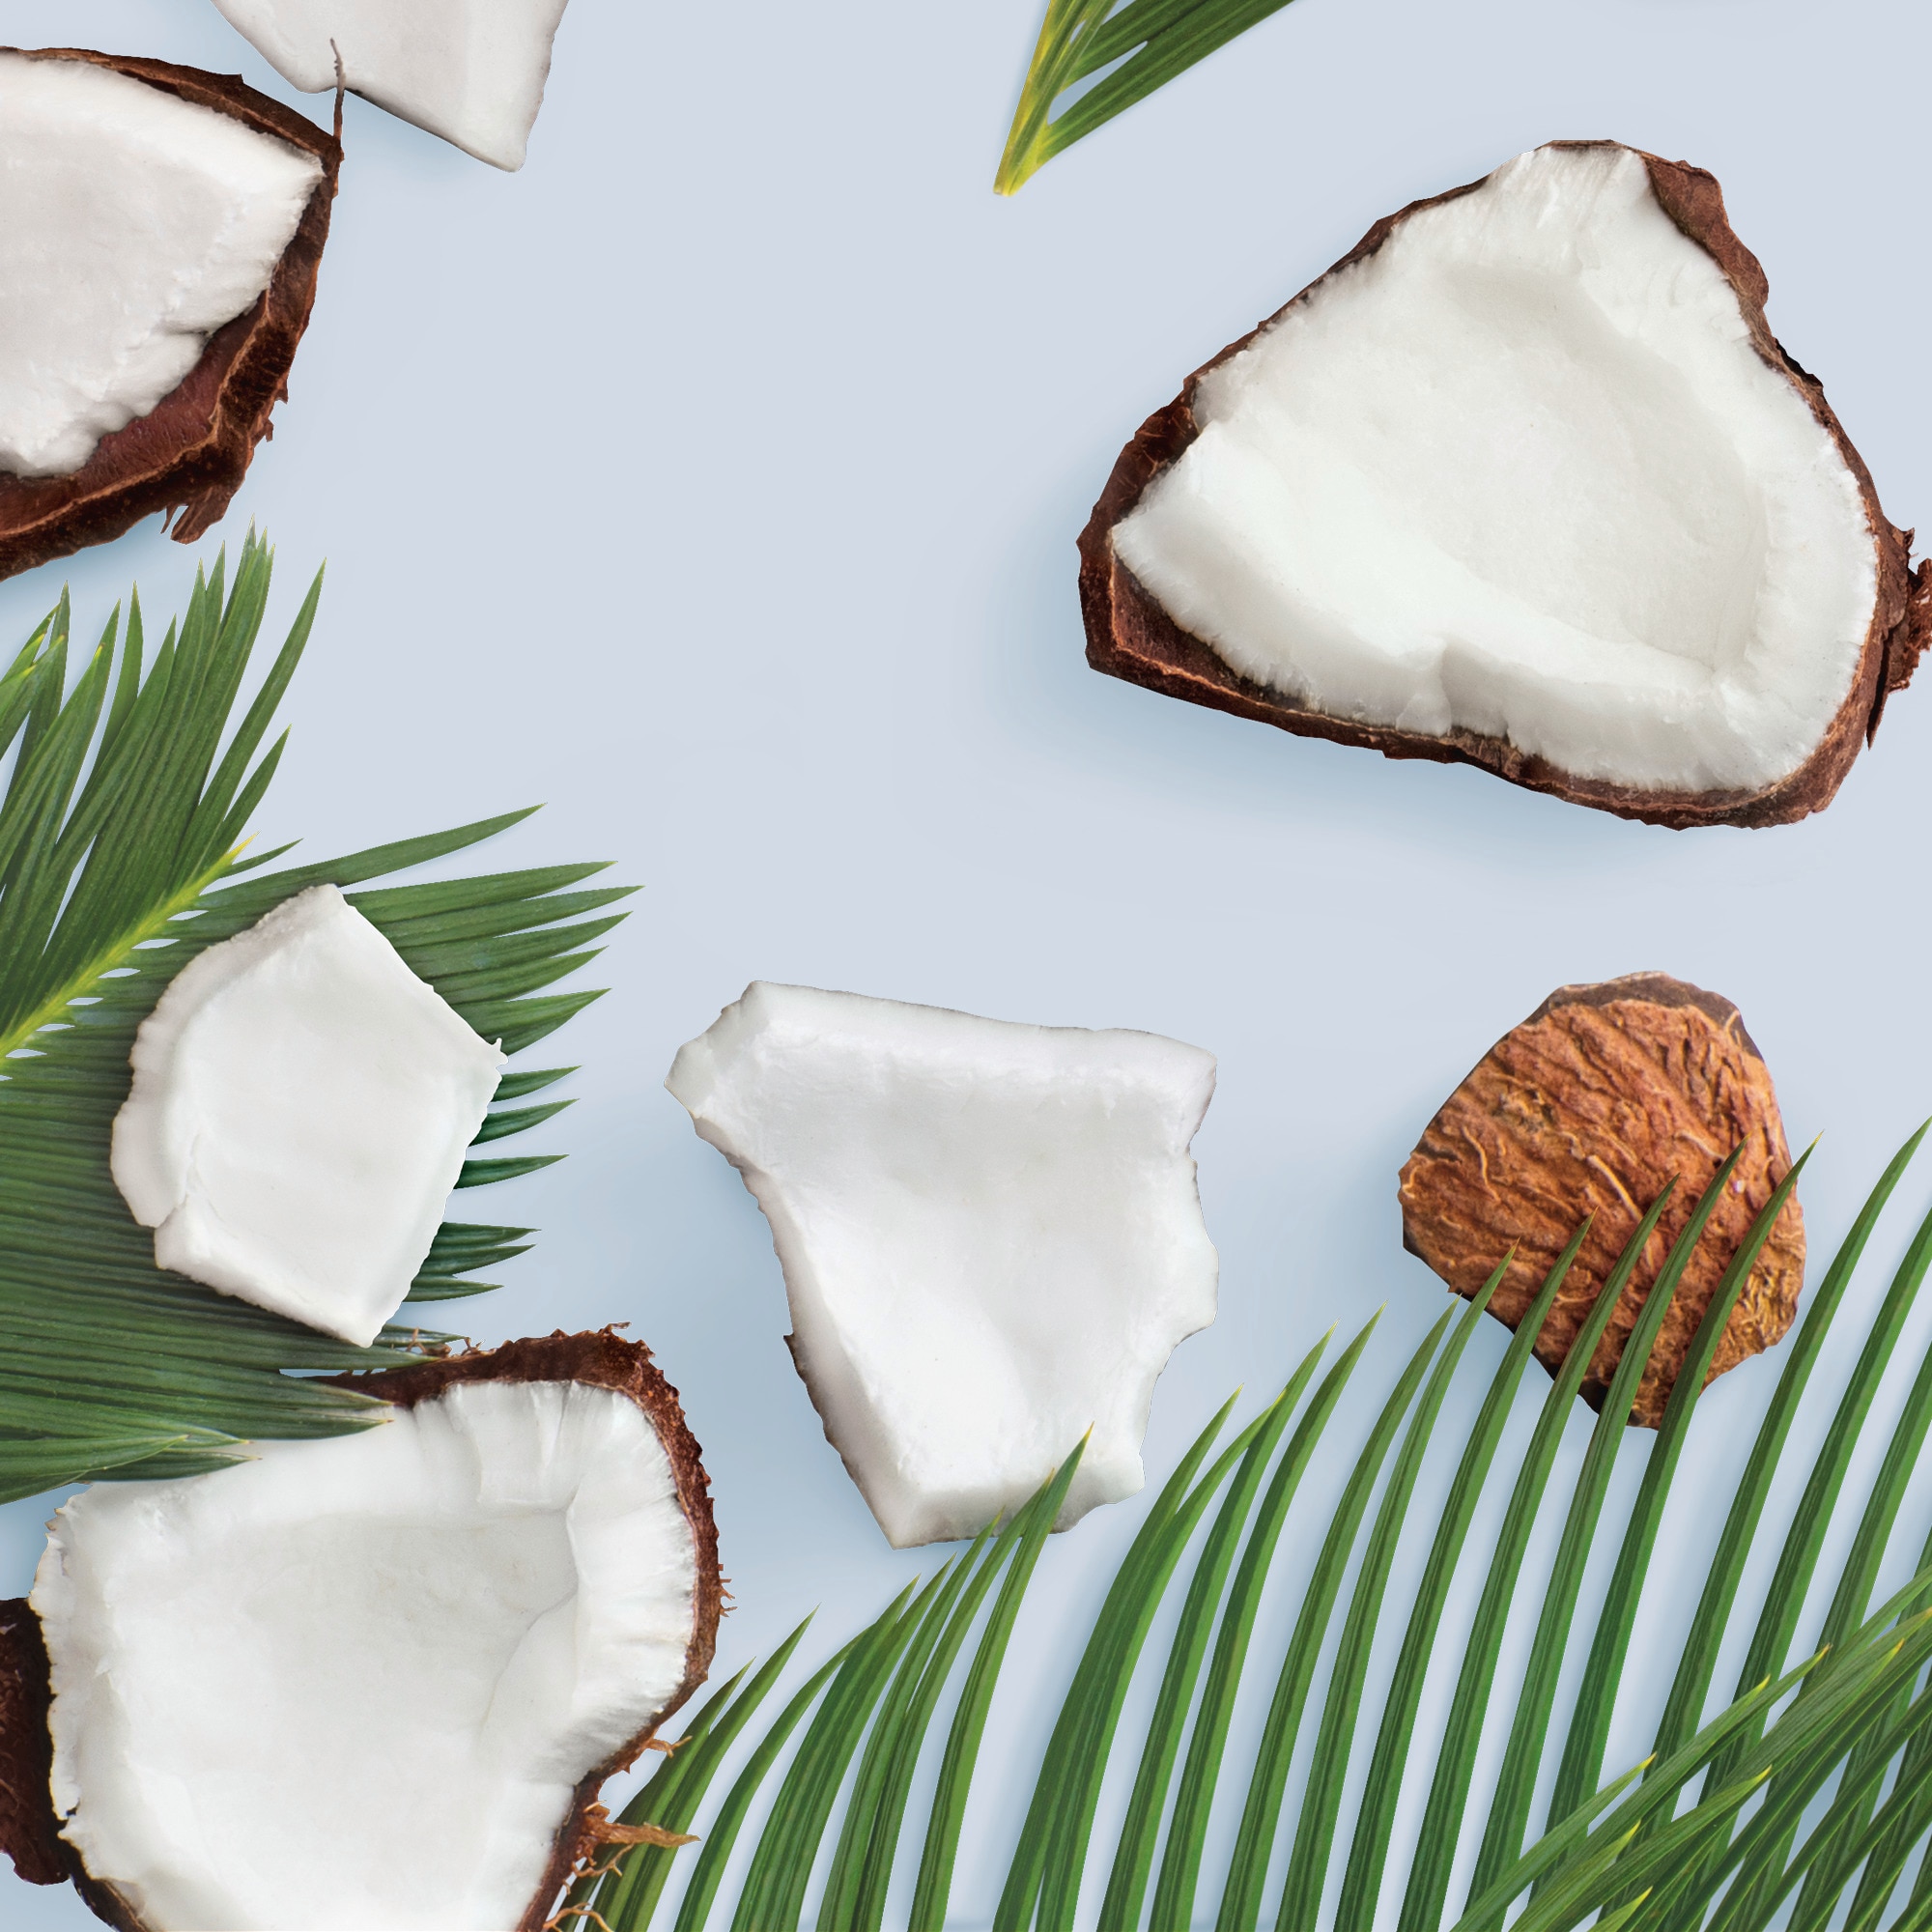 Coconut pieces and leaves Text